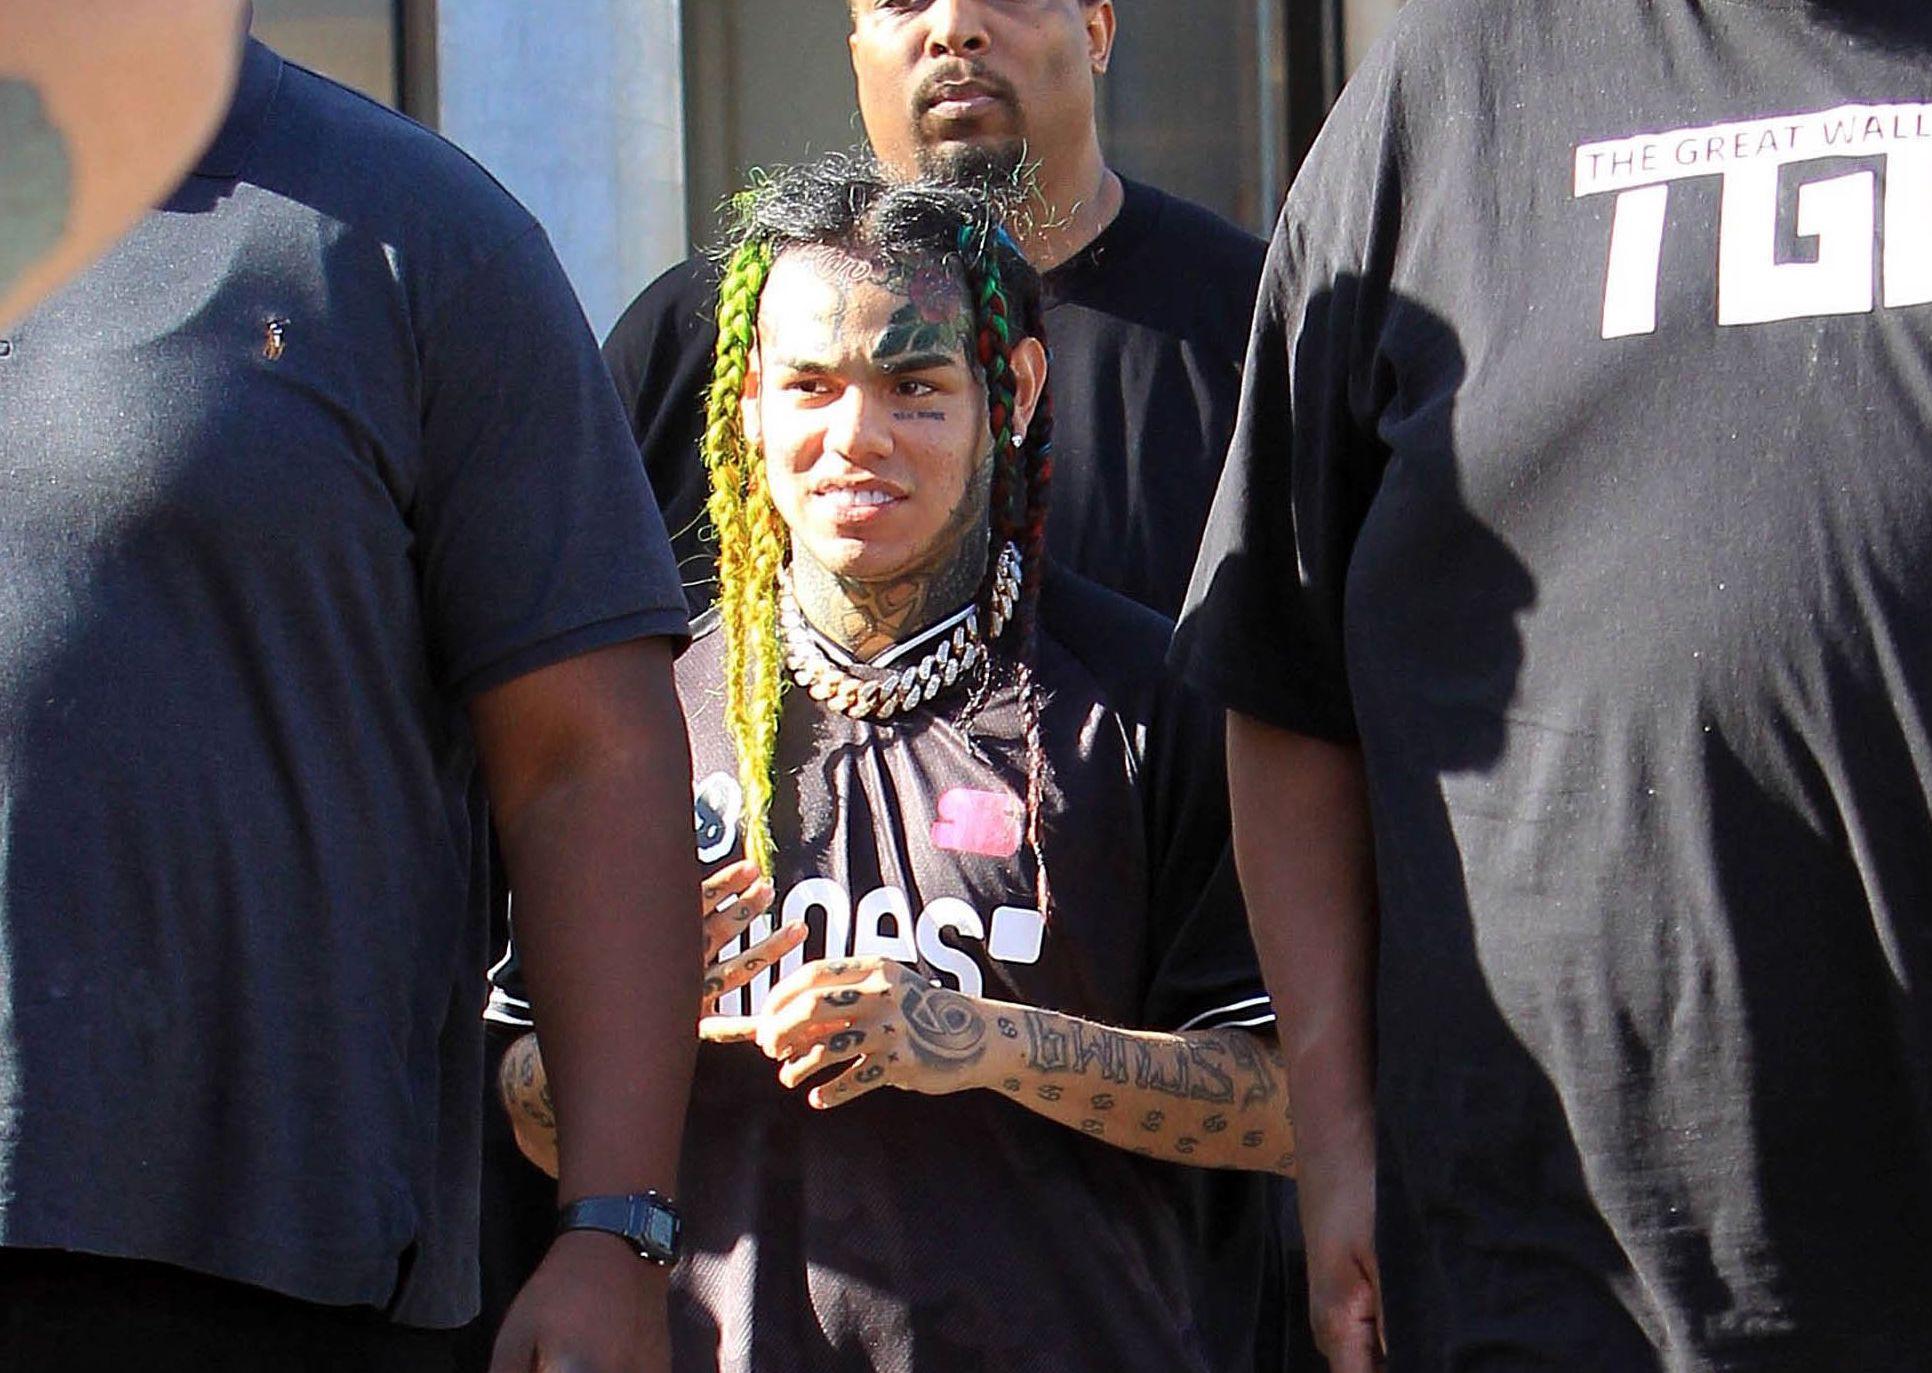 Tekashi 6ix9ine releases new album Dummy Boy while being held in custody, The Independent